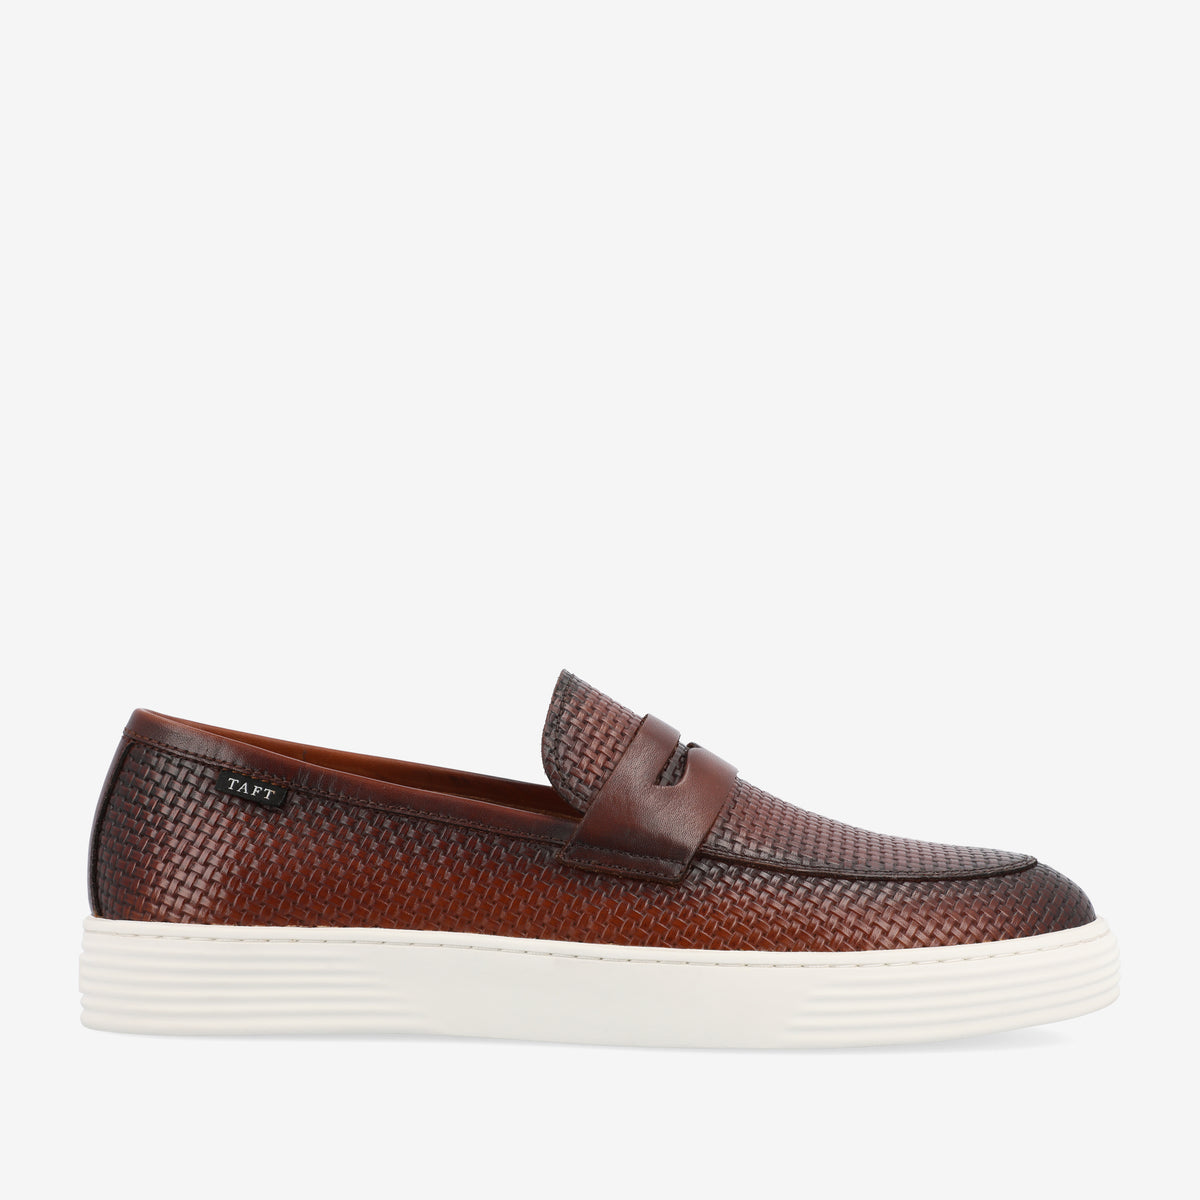 Model 106 Loafer In Chili (Last Chance, Final Sale)